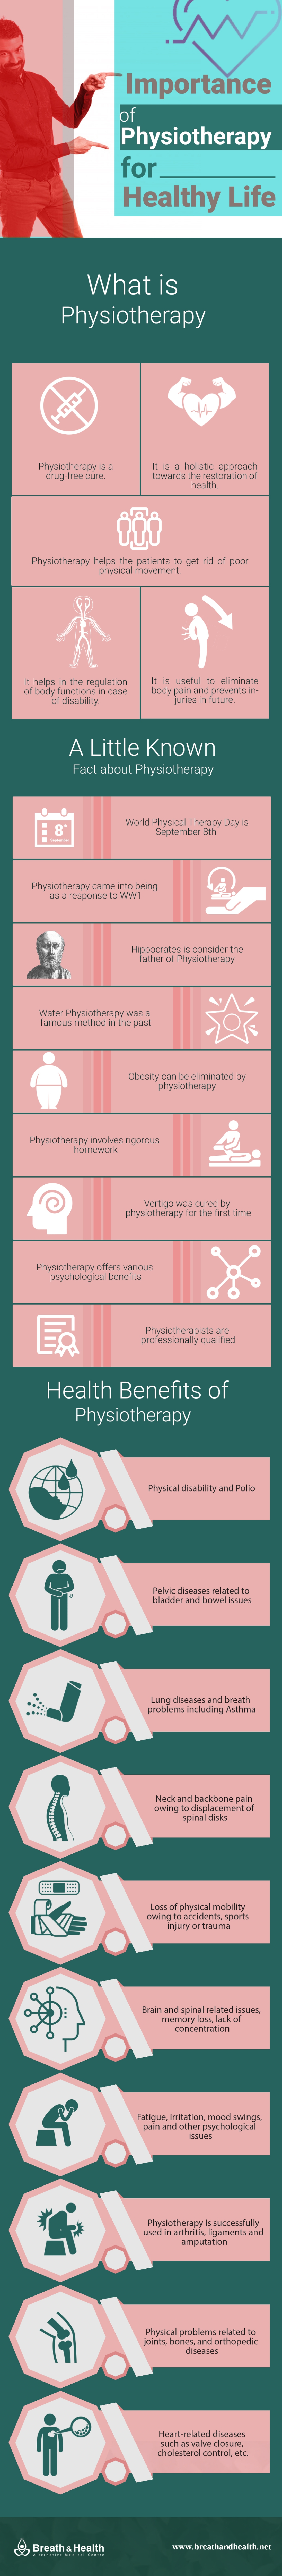 Importance of Physiotherapy for Healthy Life